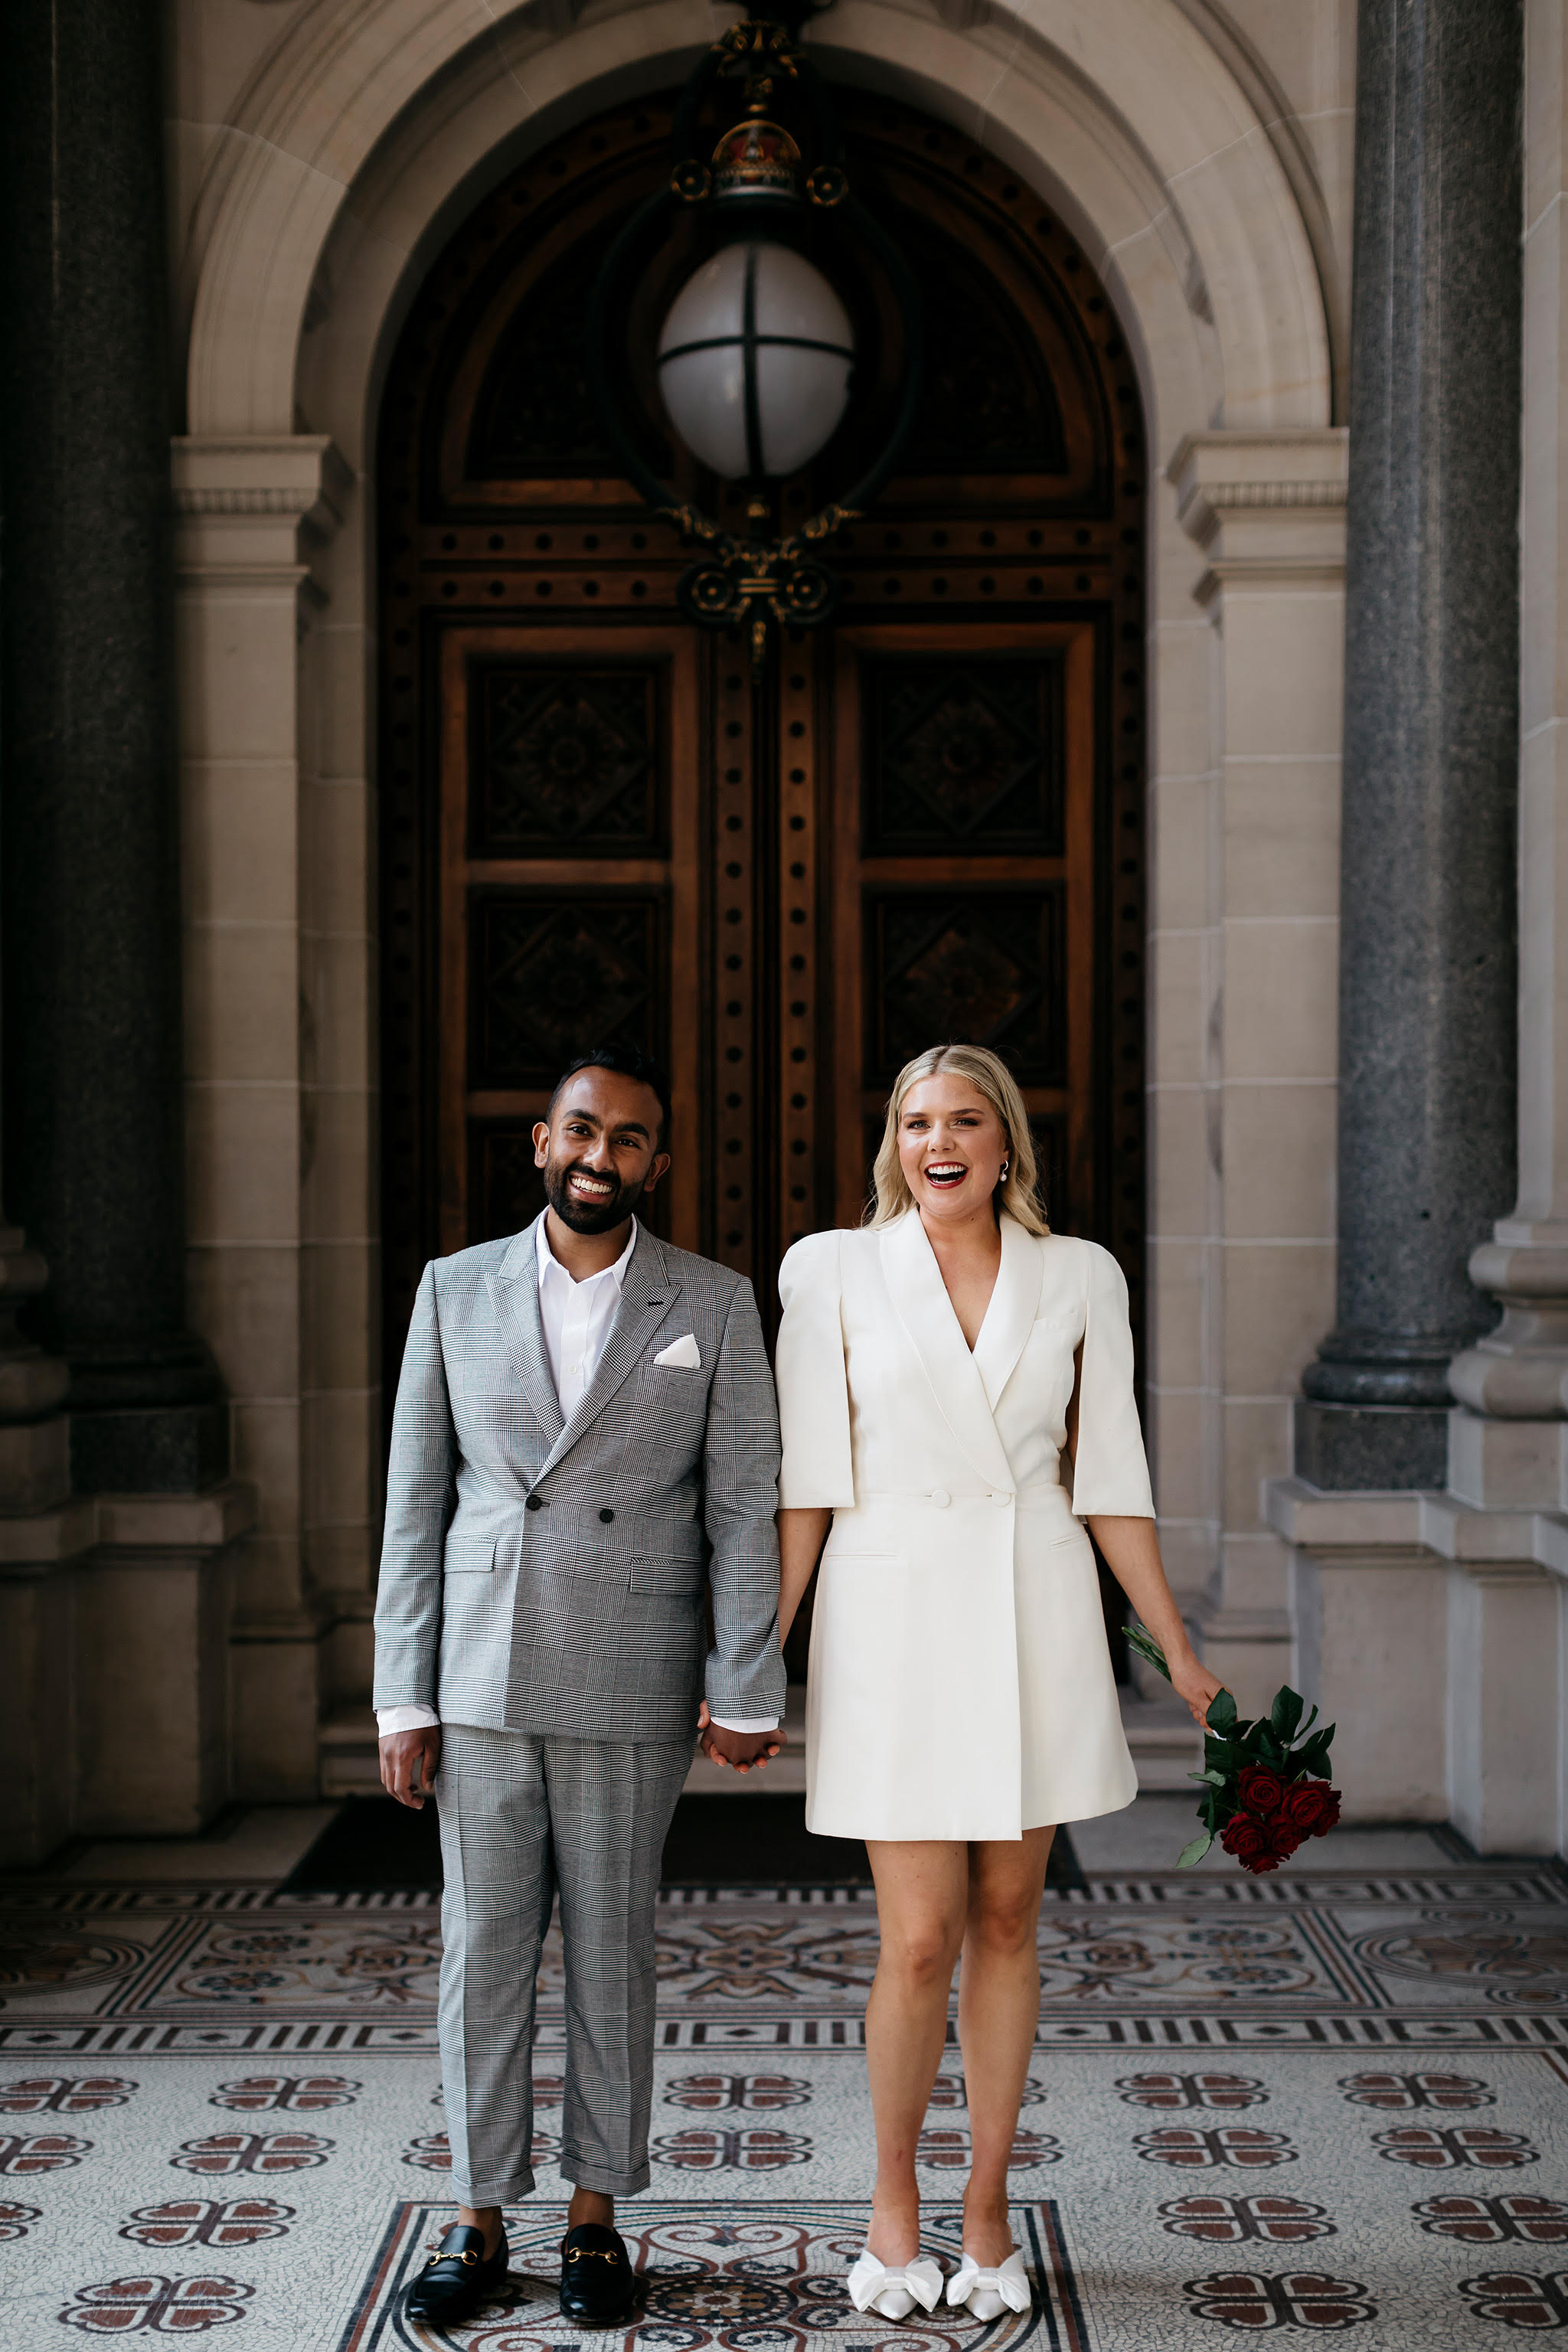 41 Courthouse Wedding Dresses for the Most Chic Wedding Day Look